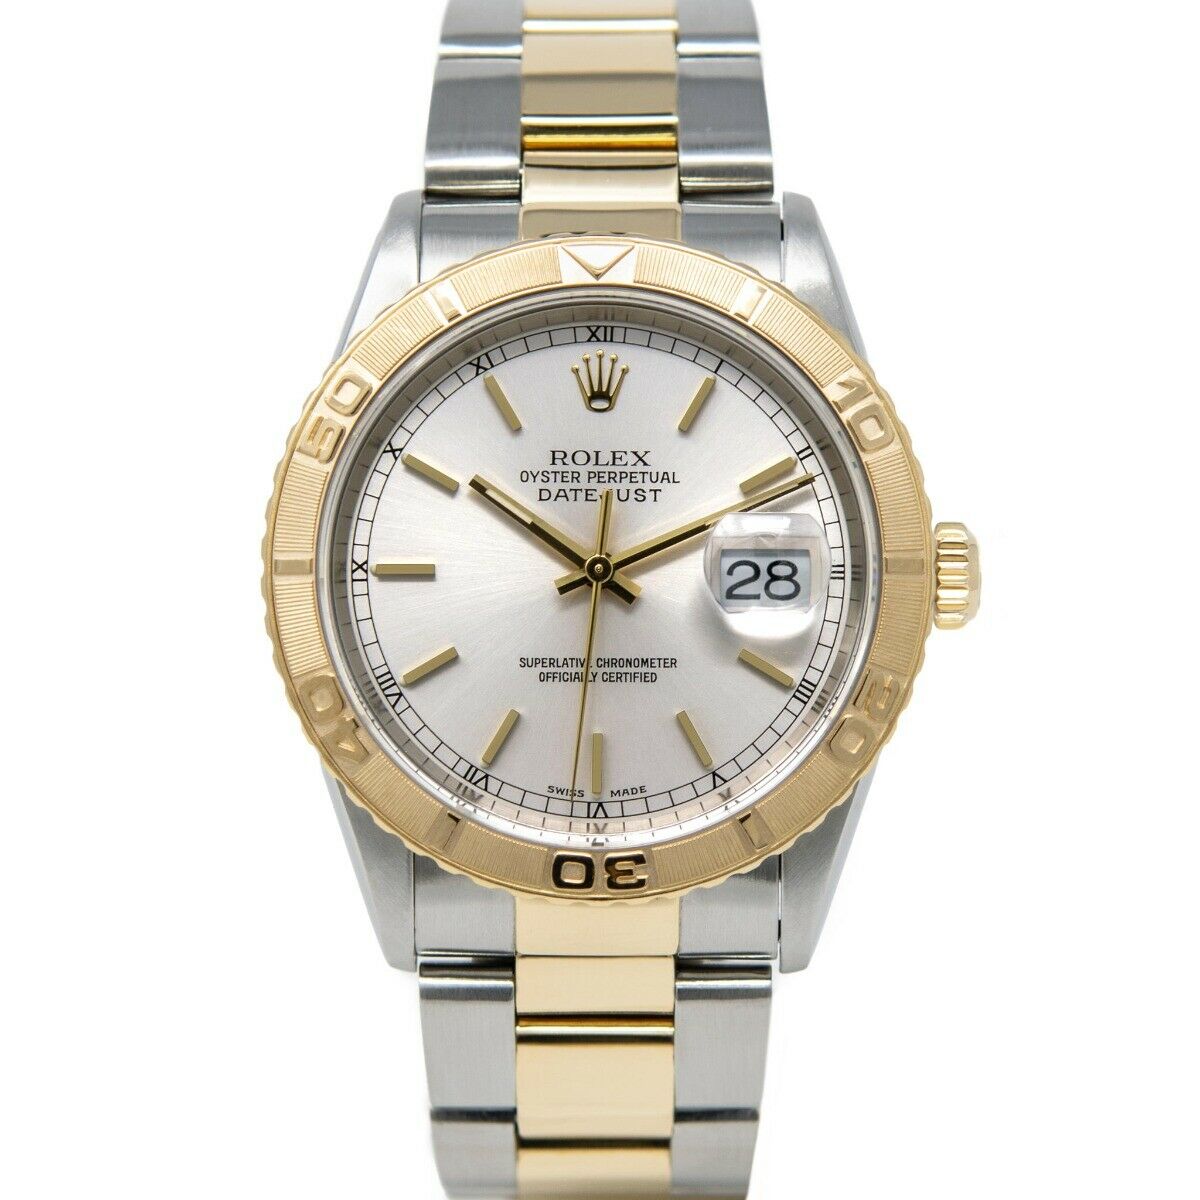 Keen to a discount on Rolex? With the help of it's possible - Time and Watches